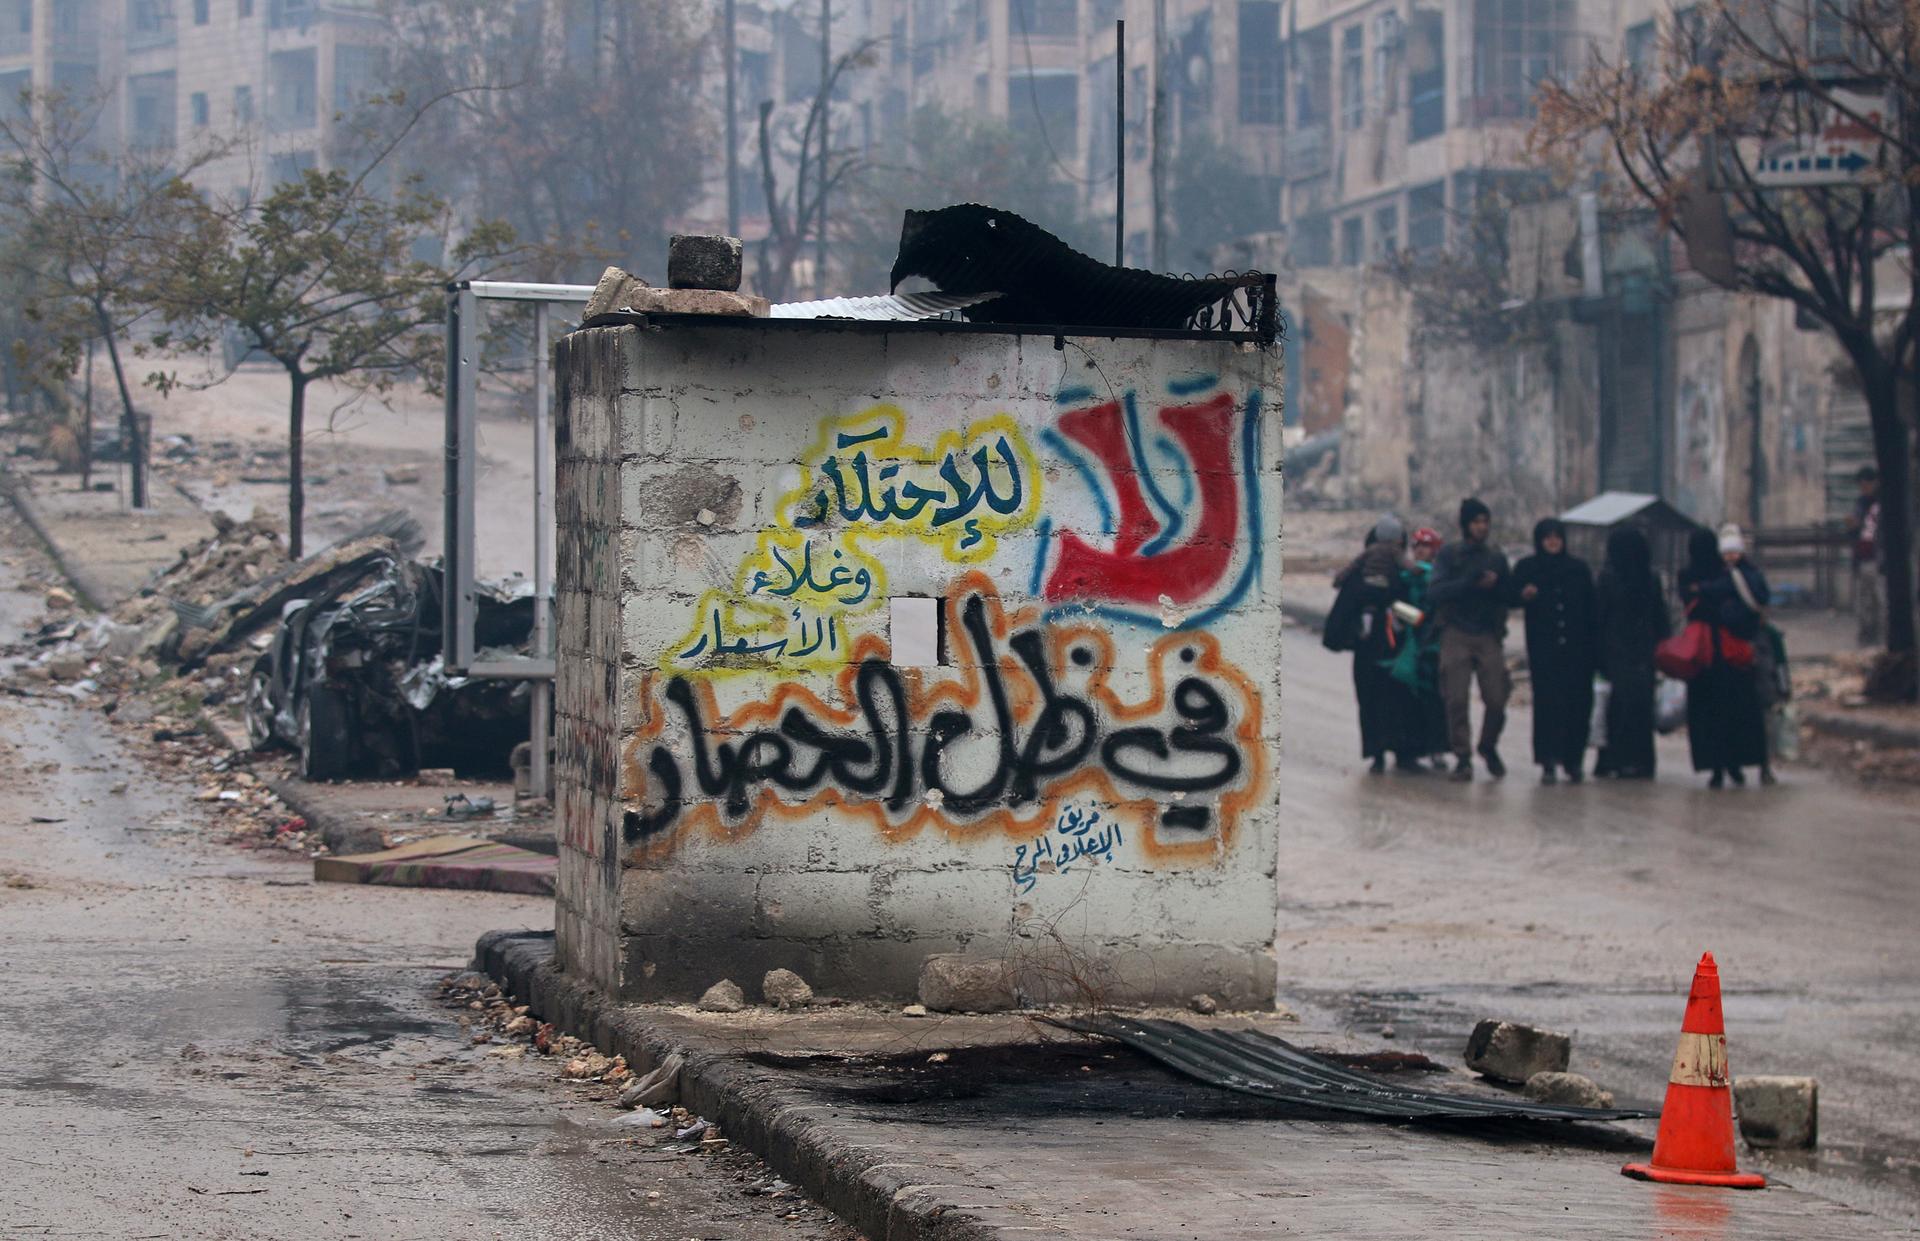 People carry their belongings as they flee deeper into the remaining rebel-held areas of Aleppo, Syria December 13, 2016. The Arabic words read, "No to monopolizing commodities and raising prices under the siege."